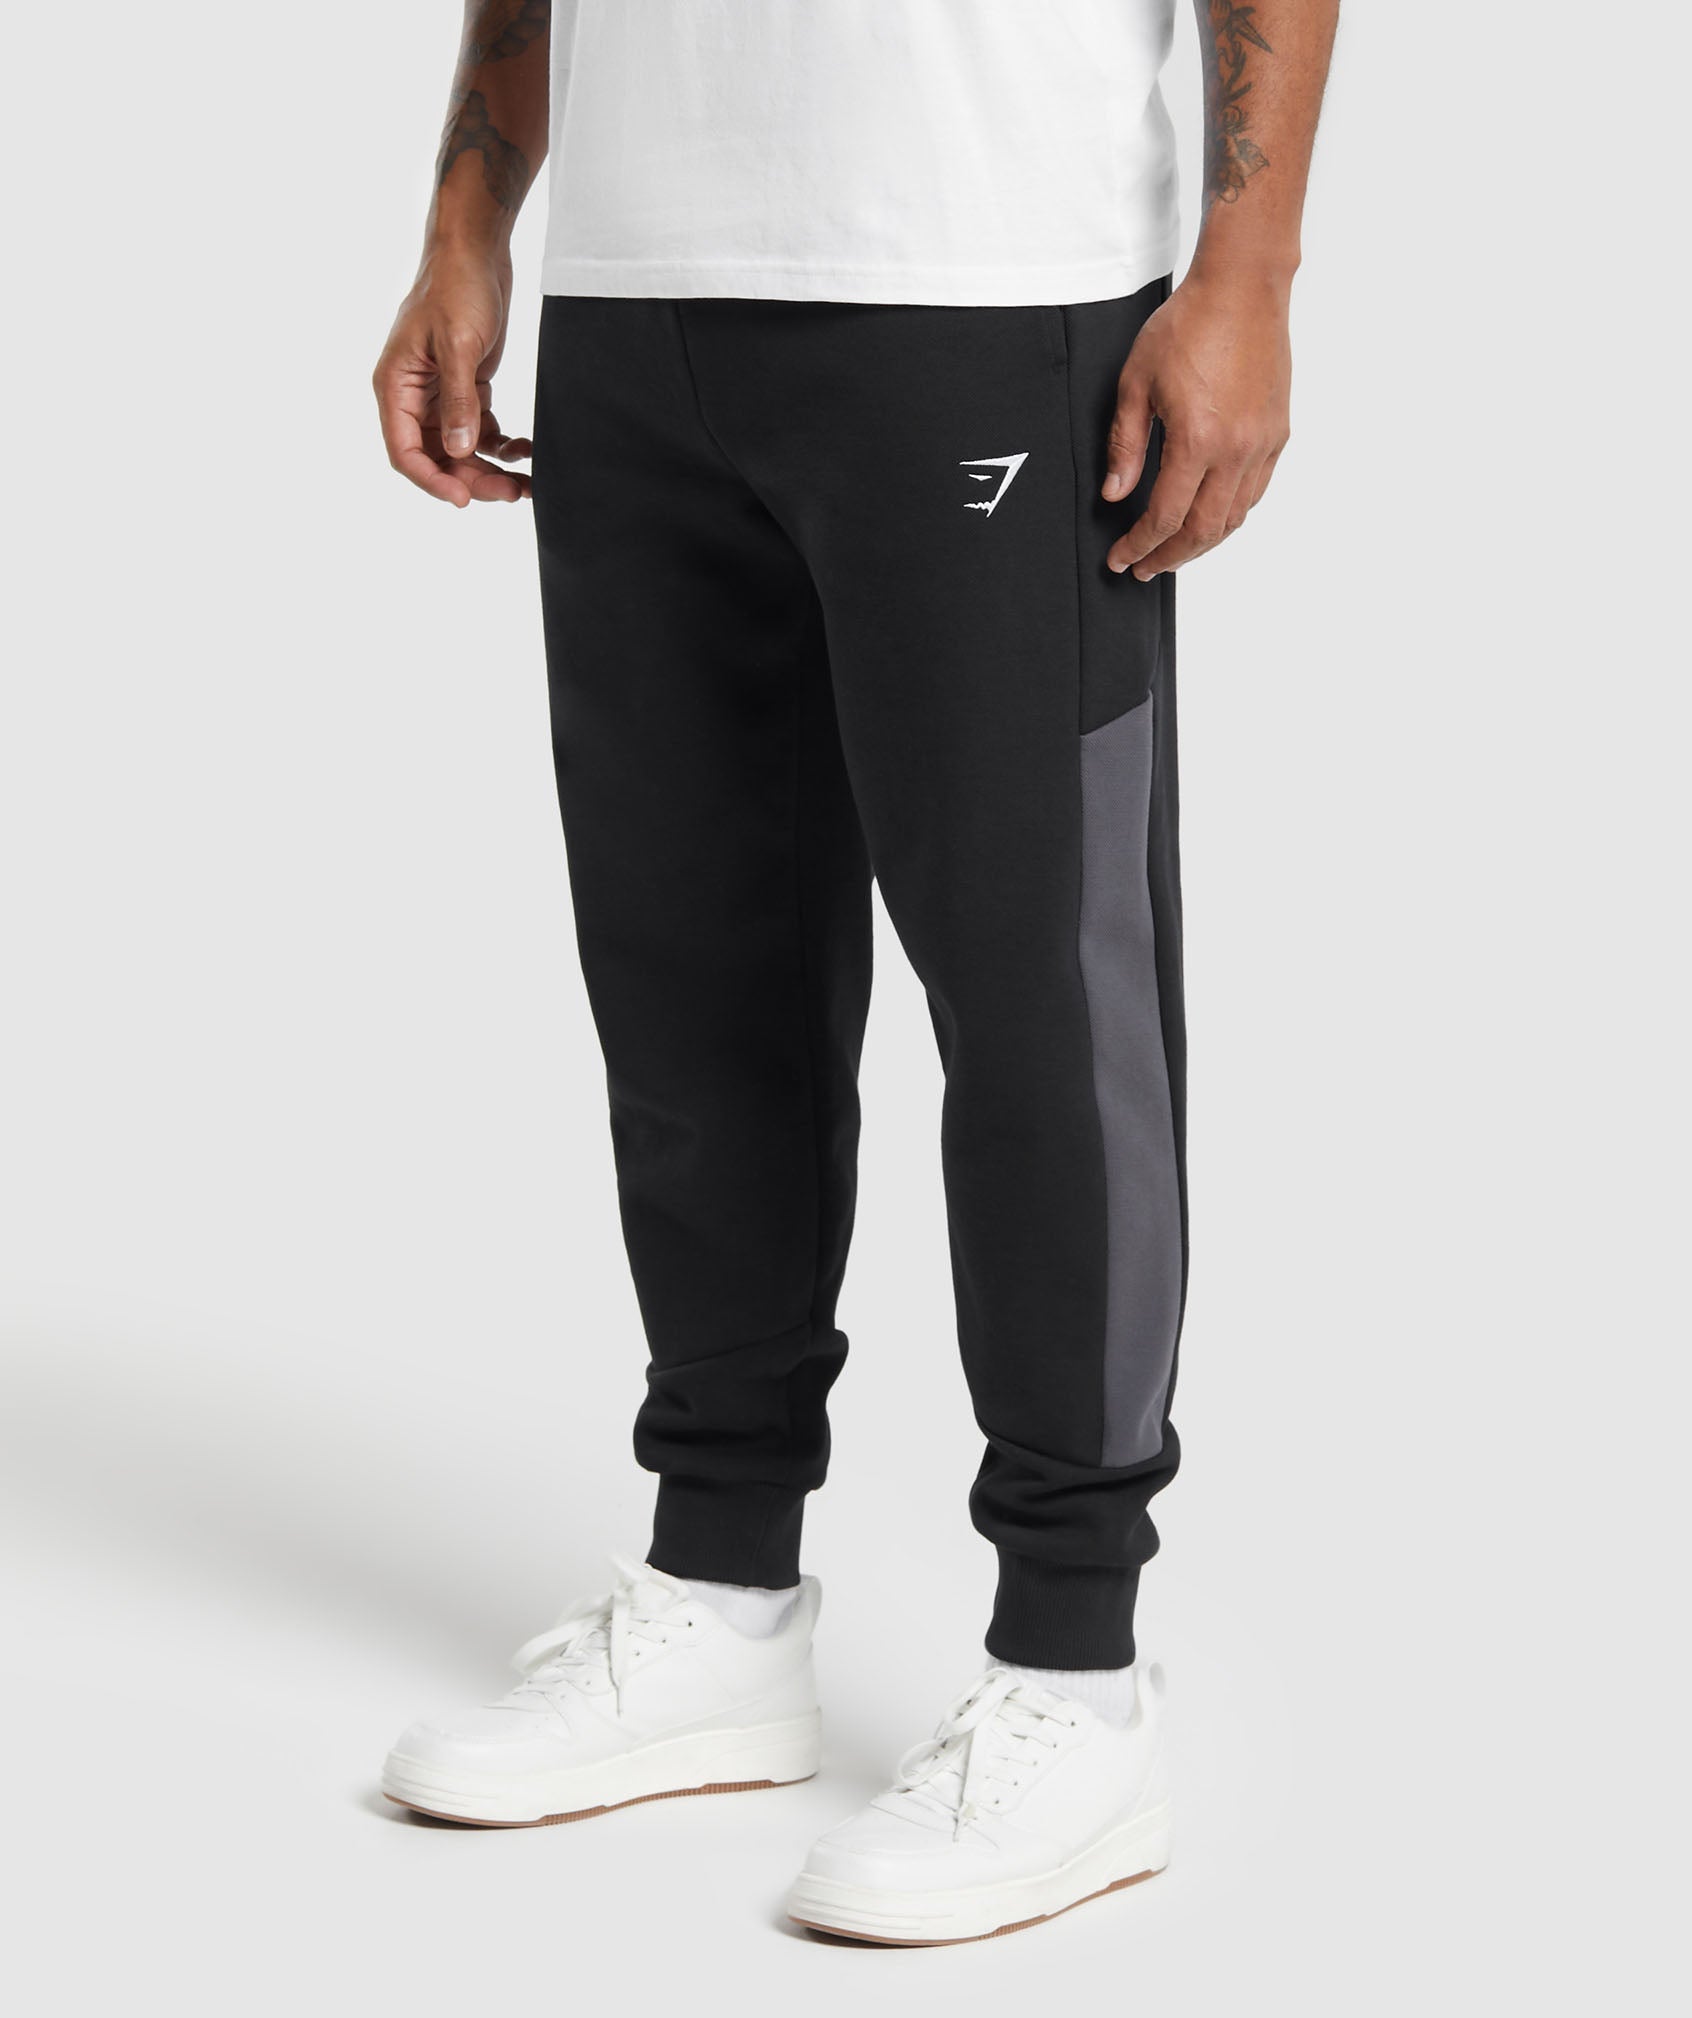 Pique Joggers in Black/Onyx Grey - view 1